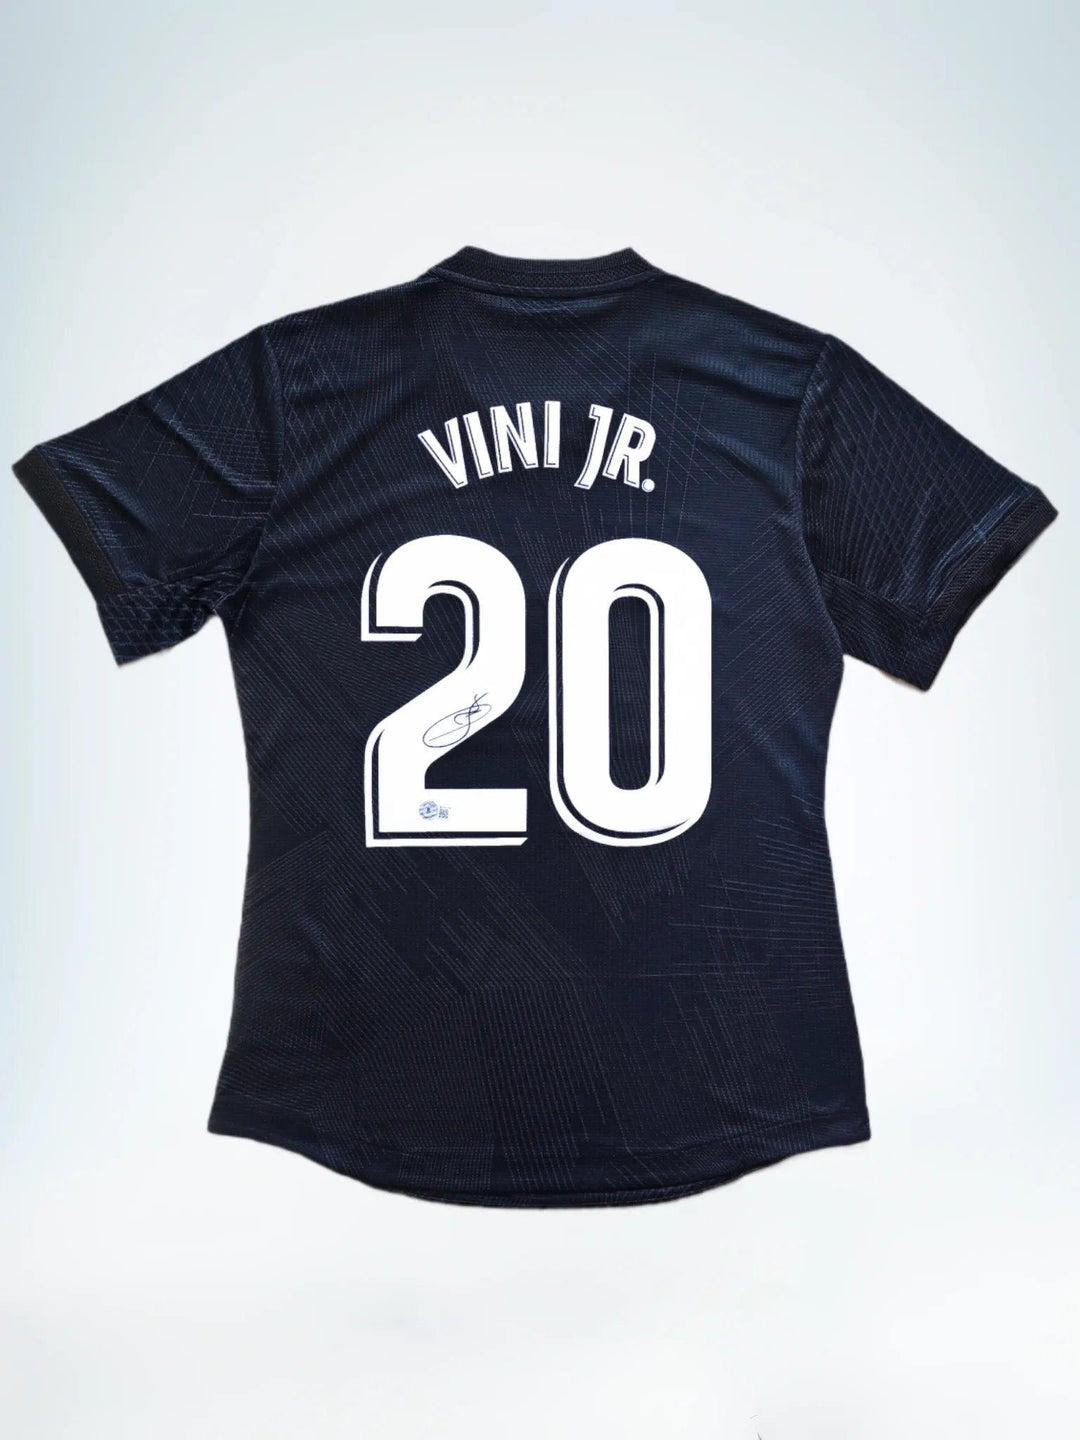 Vinicius Jr 20 Real Madrid Y-3 120th Anniversary - Signed Soccer Shirt | Collector's Edition